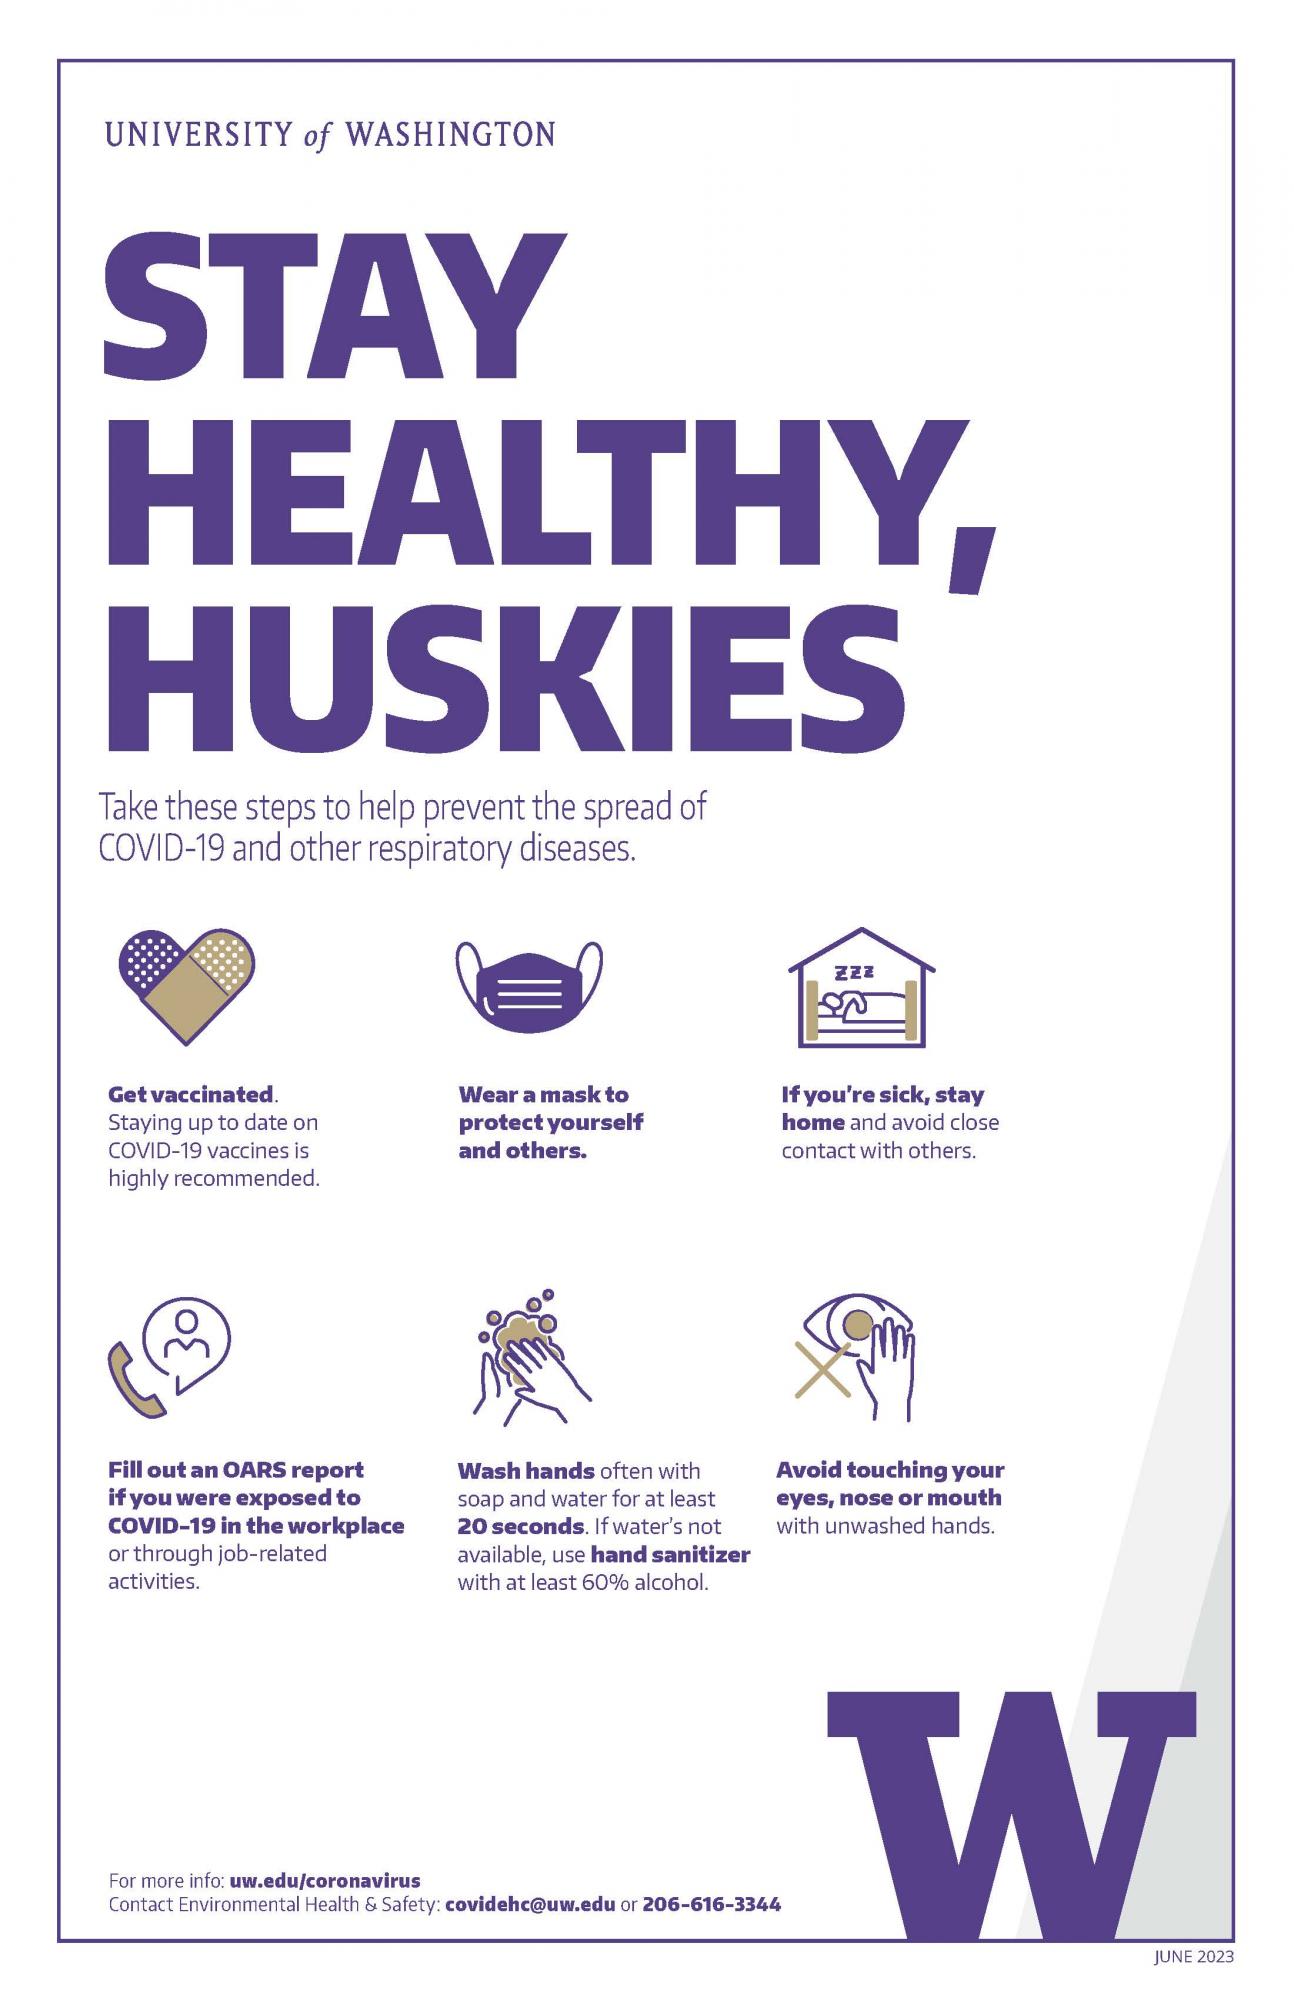 Stay Healthy Huskies poster